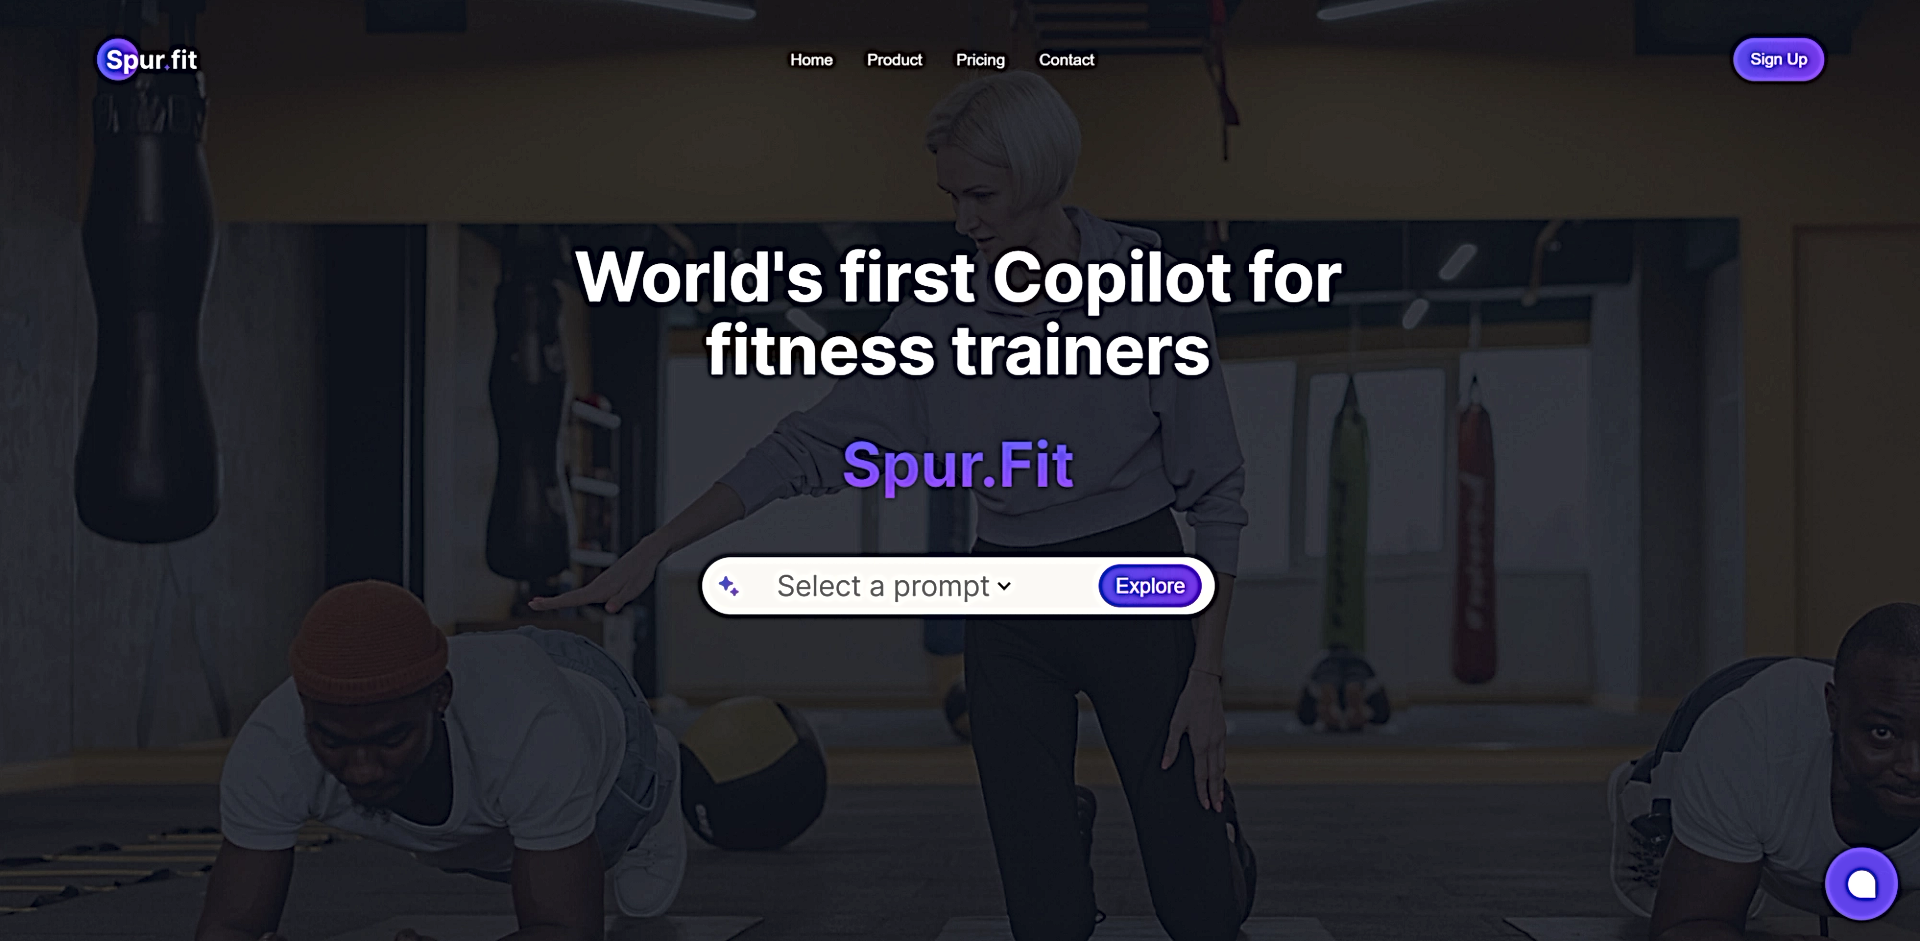 Spur Fit featured